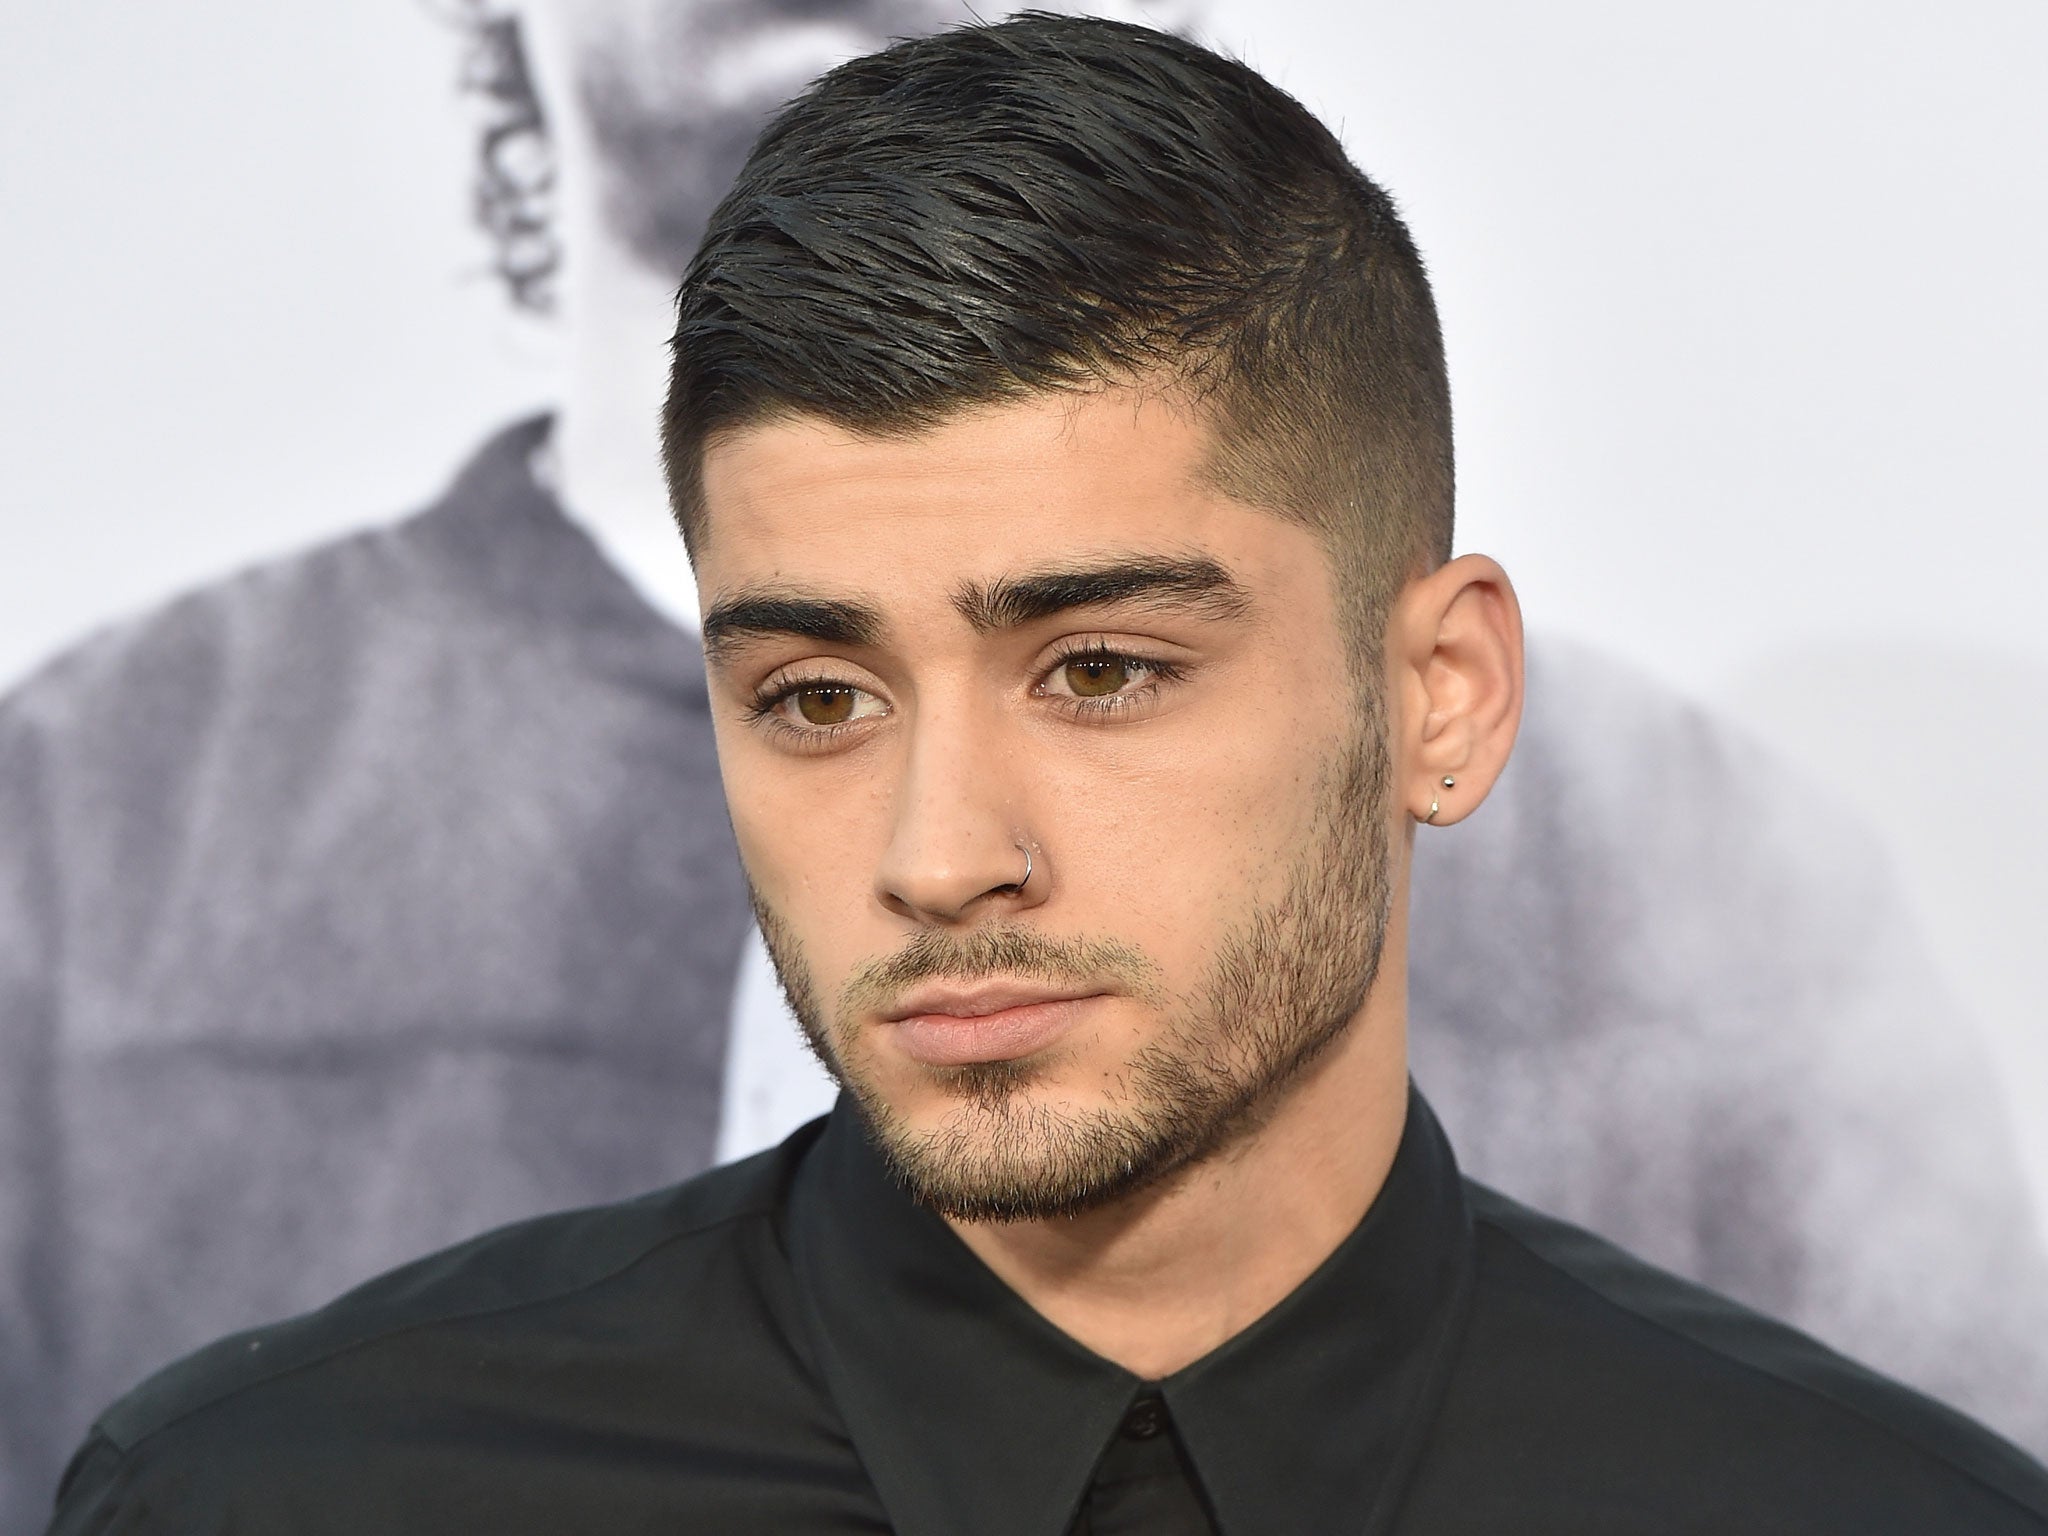 Singer Zayn Malik arrives at the premiere of Universal Pictures and Legendary Pictures' 'Straight Outta Compton' at the Microsoft Theatre on August 10, 2015 in Los Angeles, California. (Photo by Kevin Winter/Getty Images)